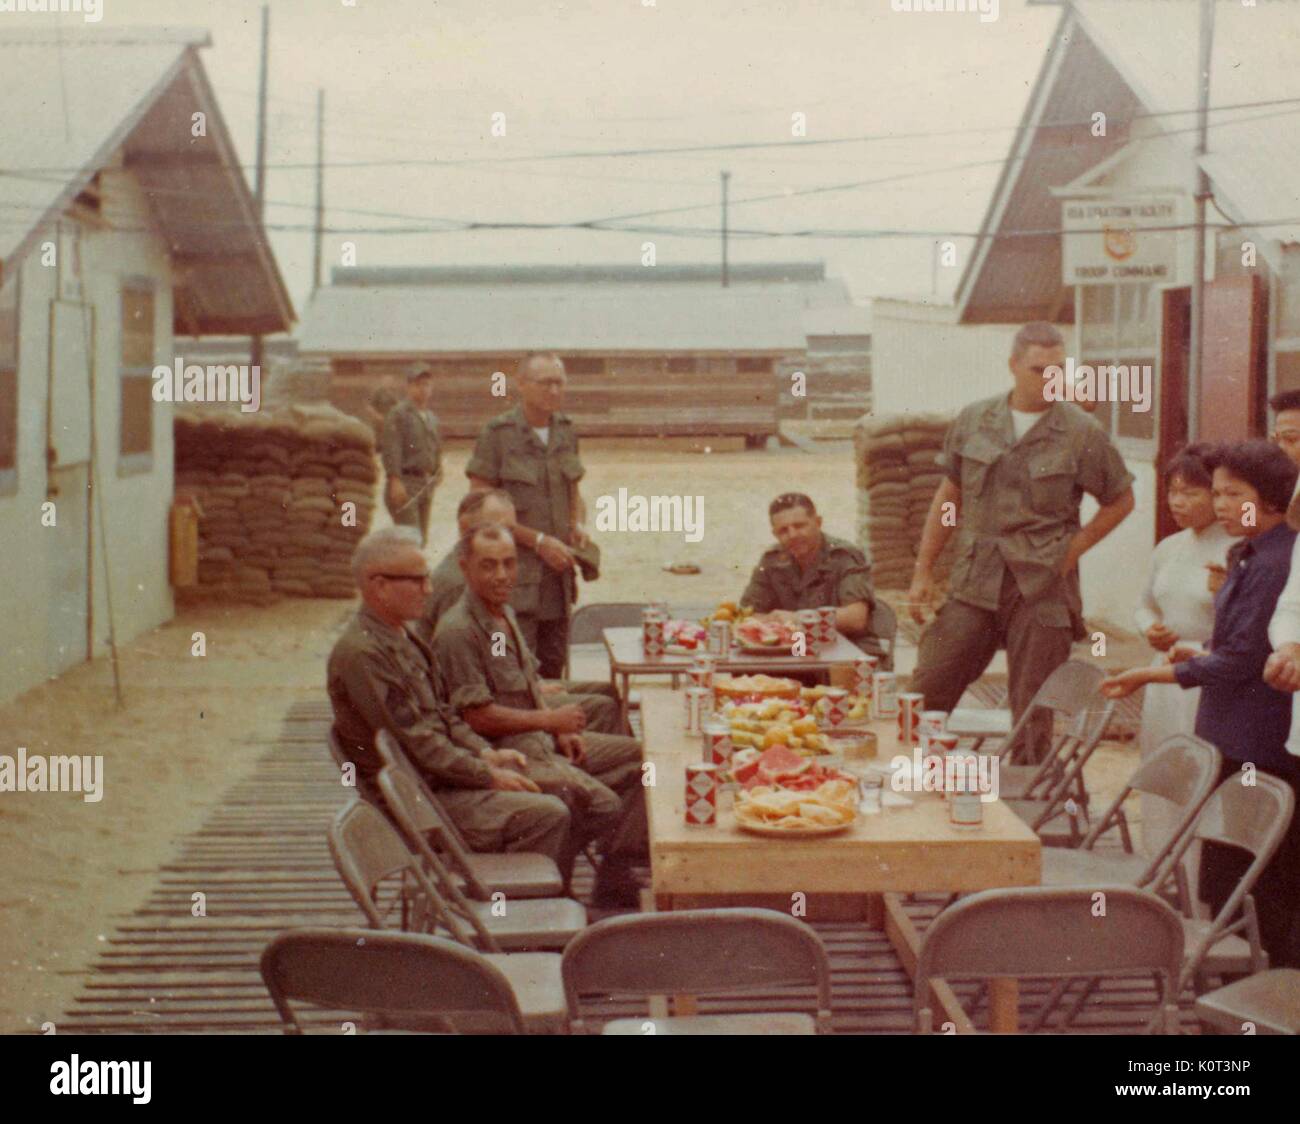 Tet Holiday, American soldiers enjoying a meal at a long table to celebrate the holiday at their base in Vietnam during the Vietnam War, drinks and other food items visible on the table, several South Vietnamese woman standing nearby, 1965. Stock Photo